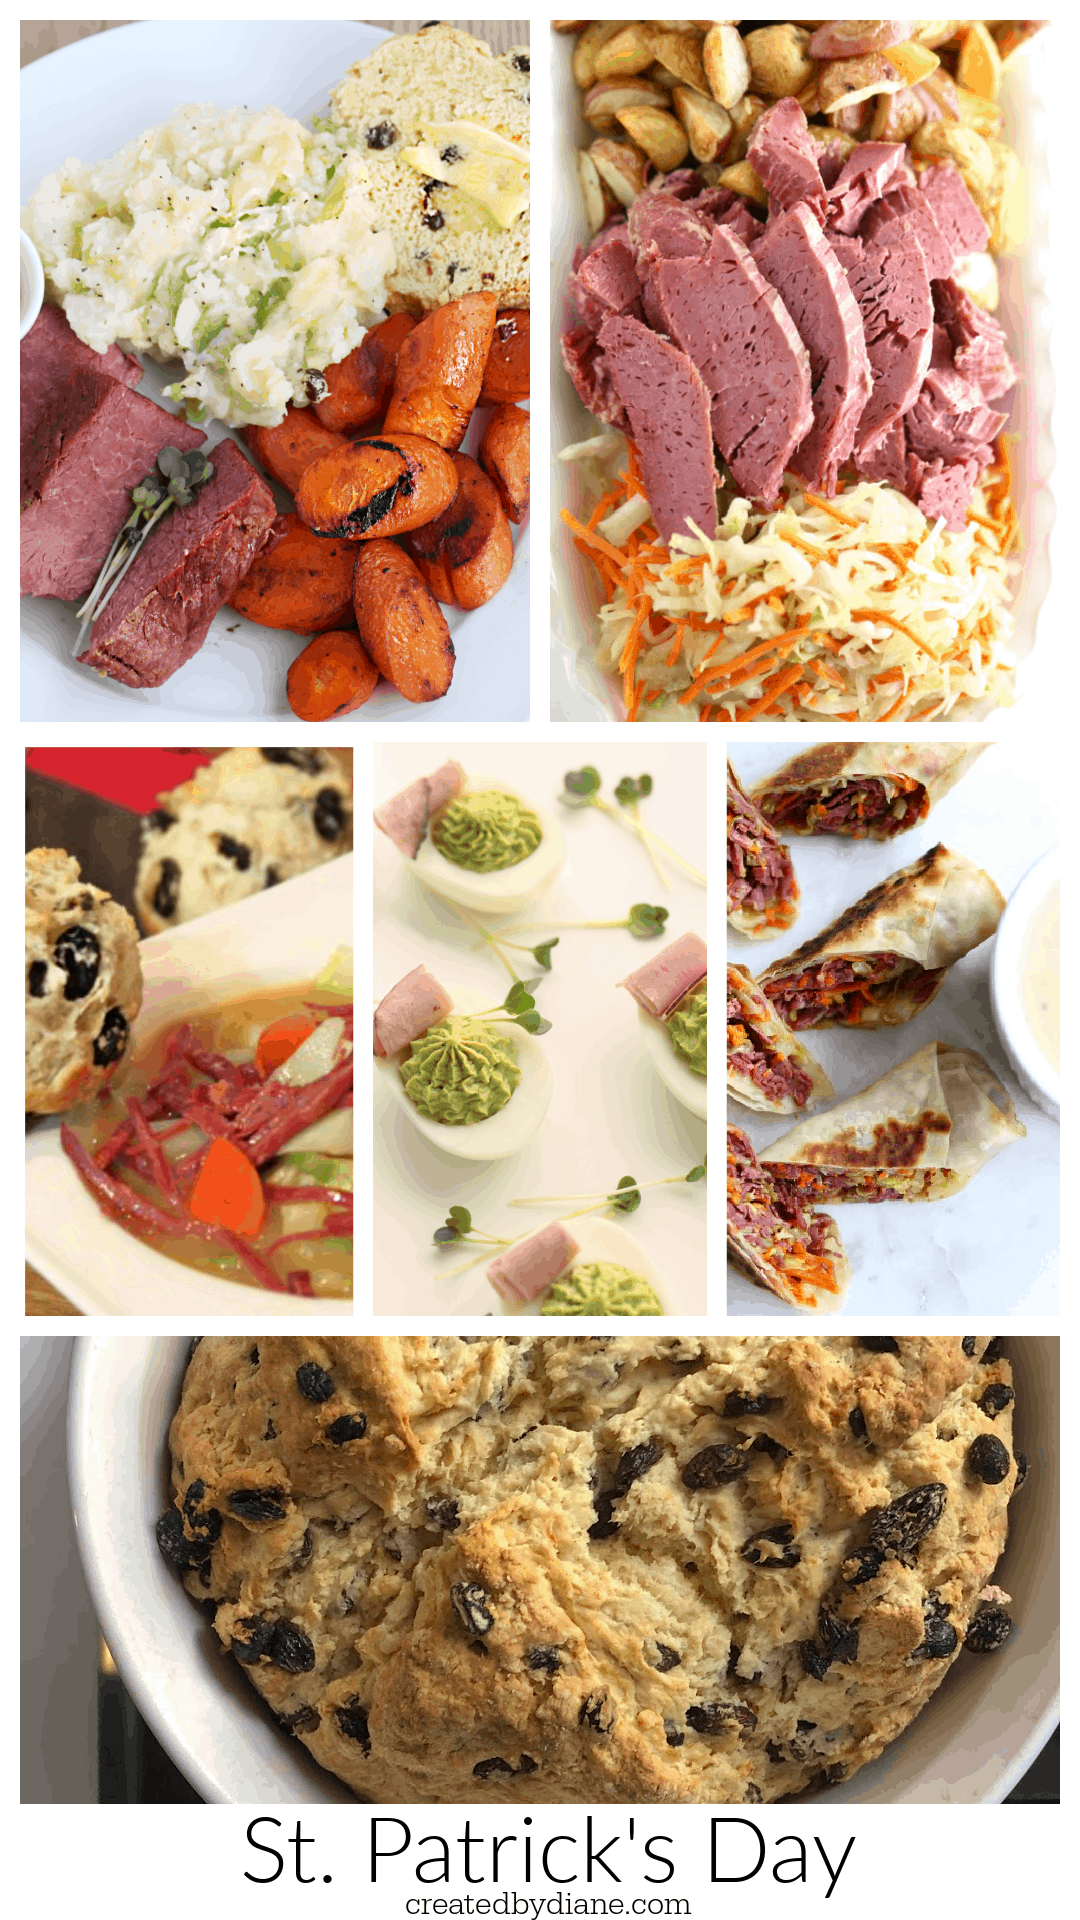 St. Patrick’s Day Foods